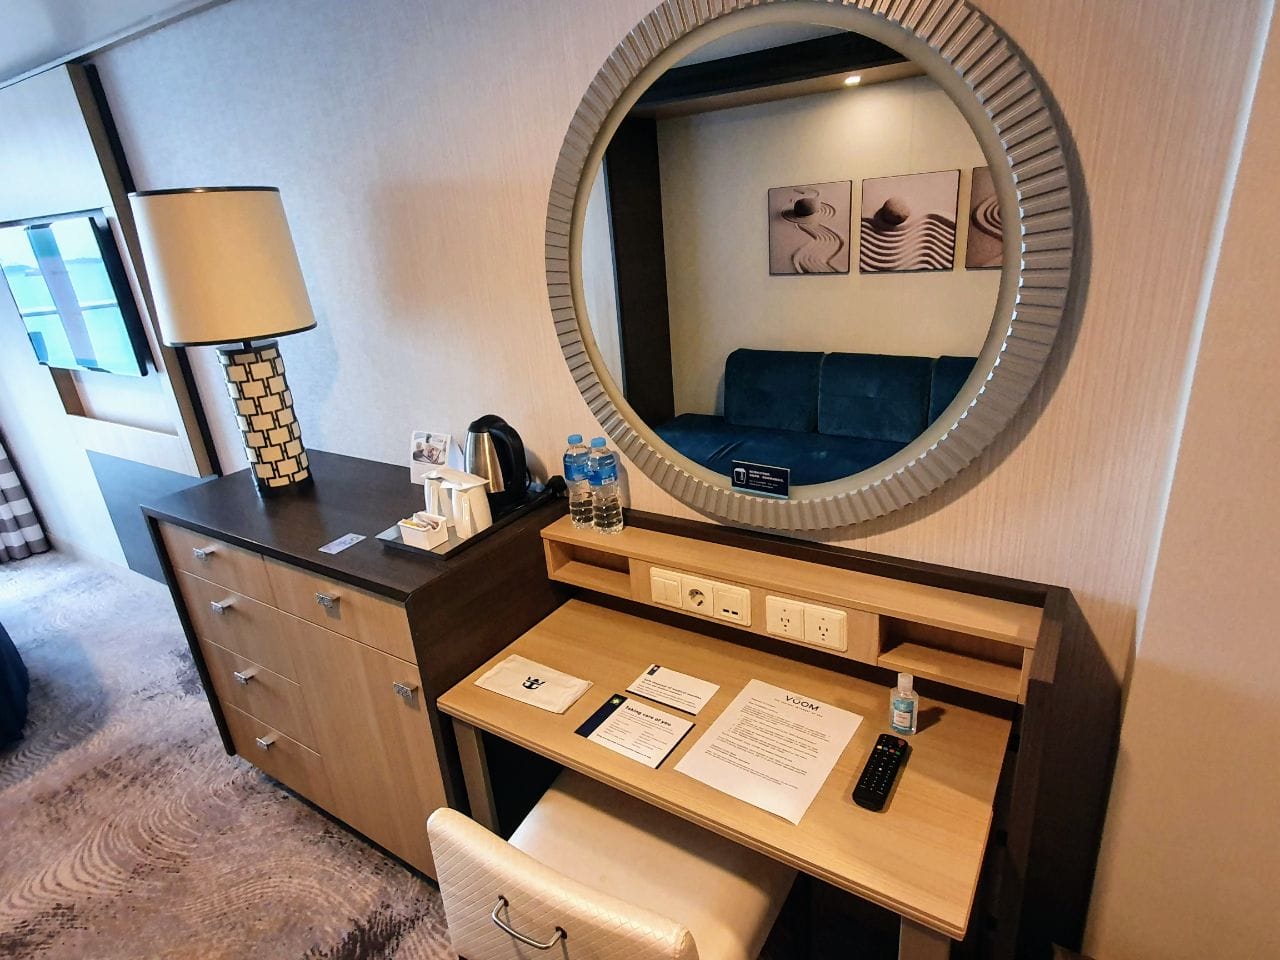 Quantum of the Seas balcony stateroom dressing table